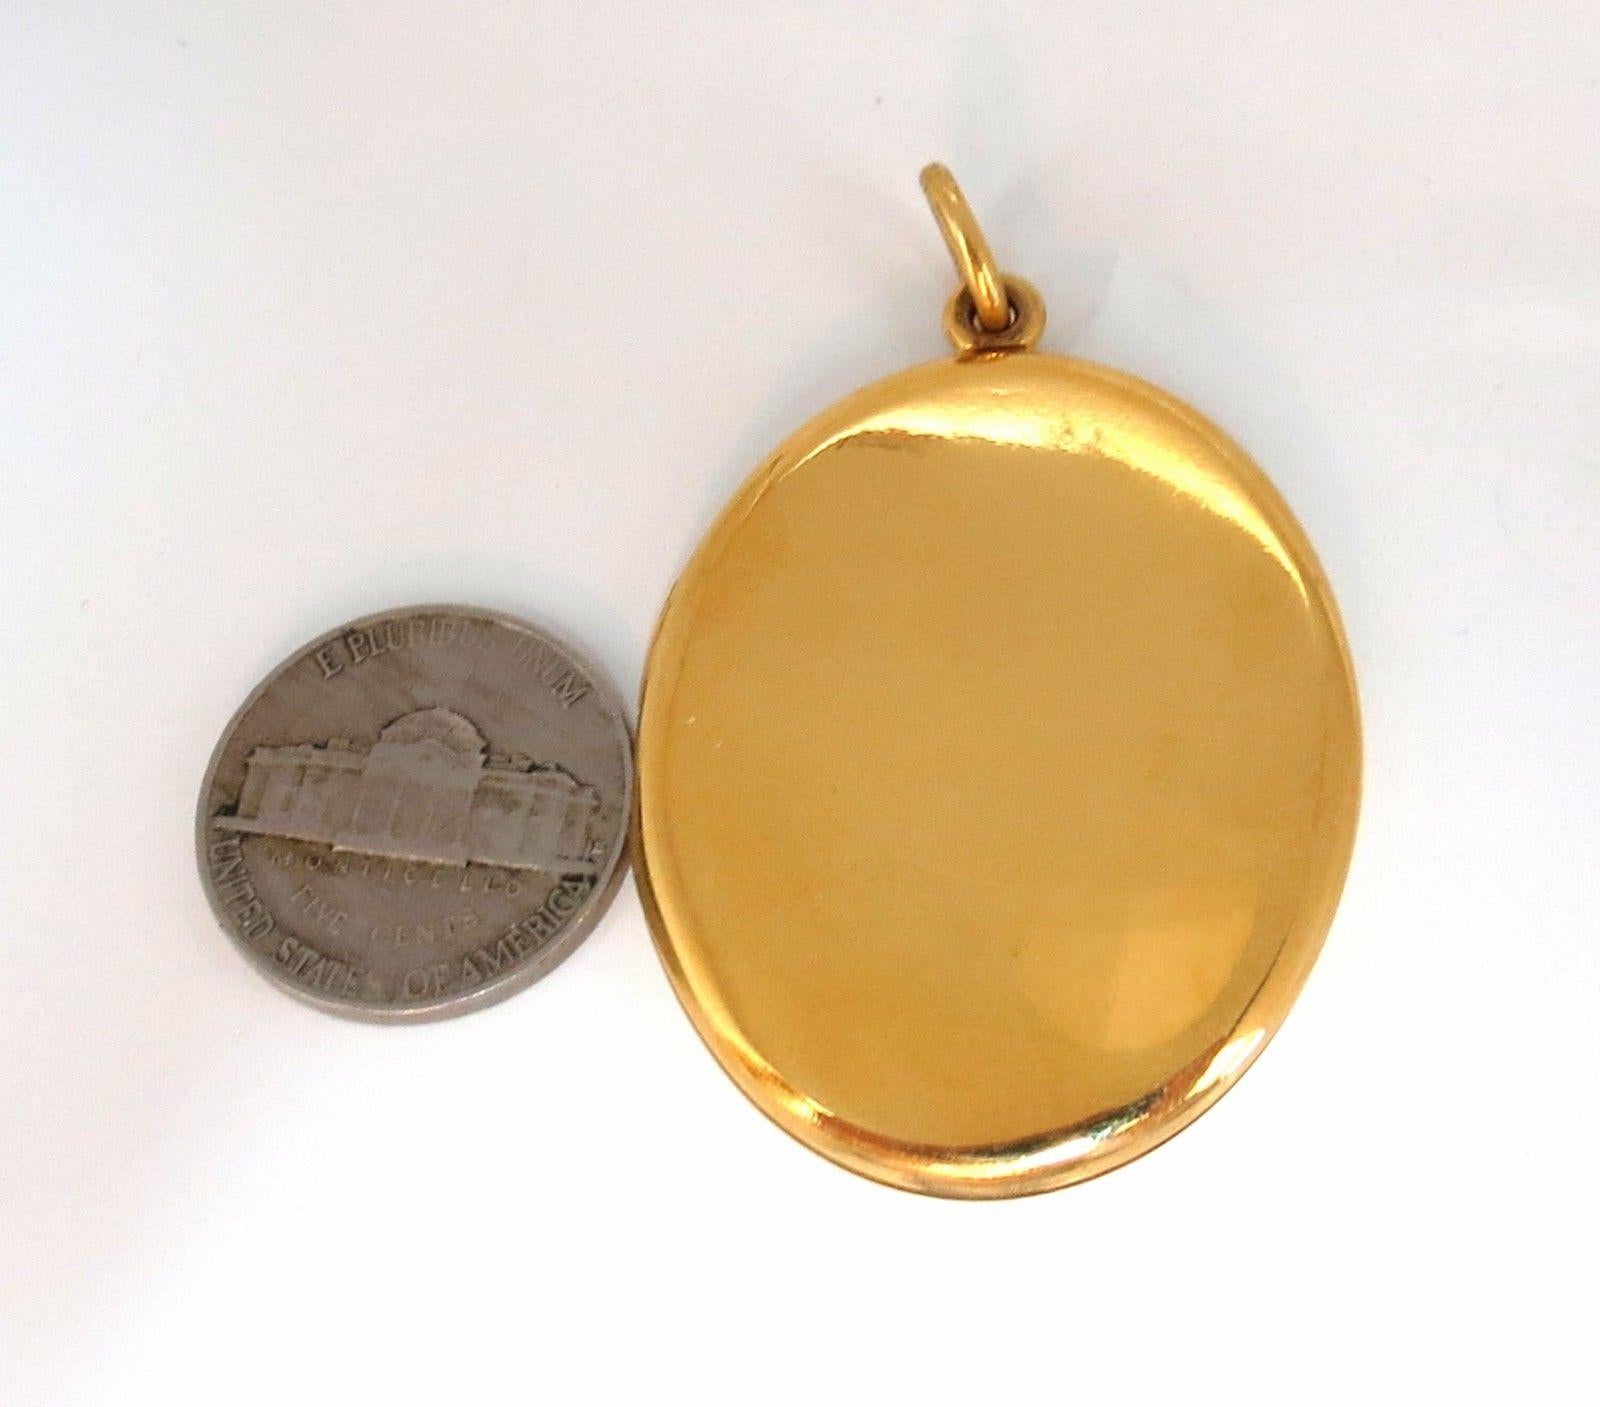 Classic Oval Locket

2 X 1.25 inch

14Kt Yellow Gold

Grand Weight: 15.5 Grams